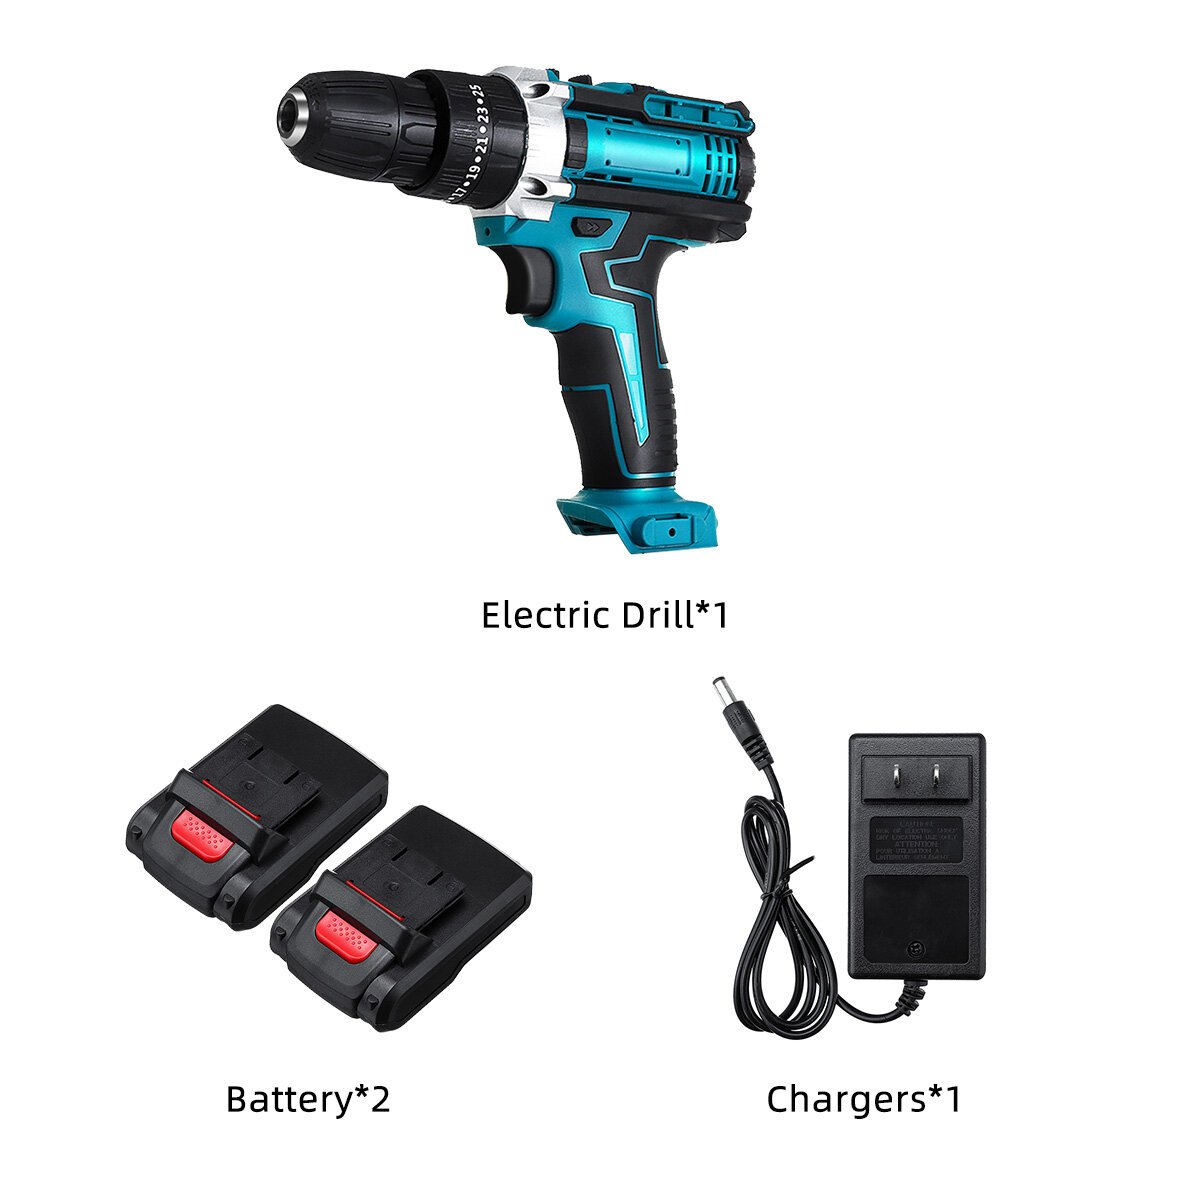 best price,drillpro,20v,1450rpm,gears,28nm,electric,drill,with,batteries,eu,discount